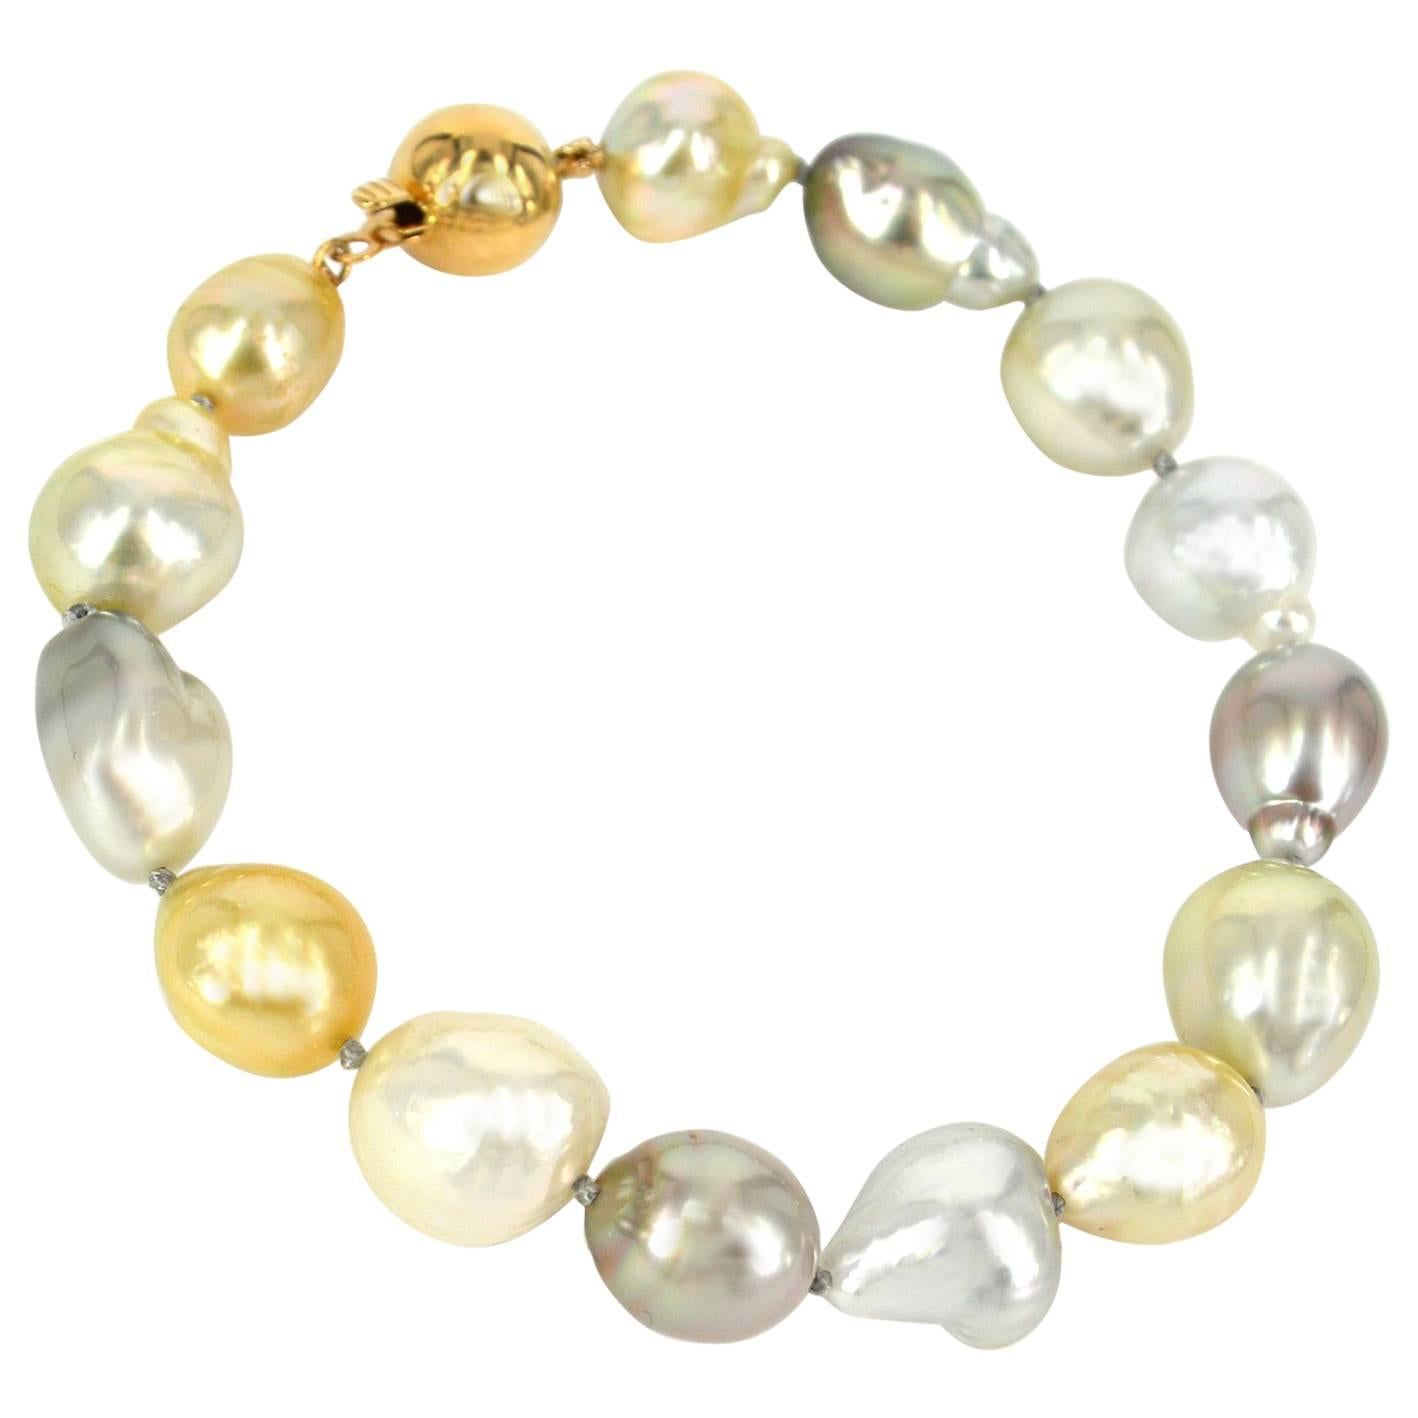 Baroque South Sea and Tahitian Pearl Bracelet